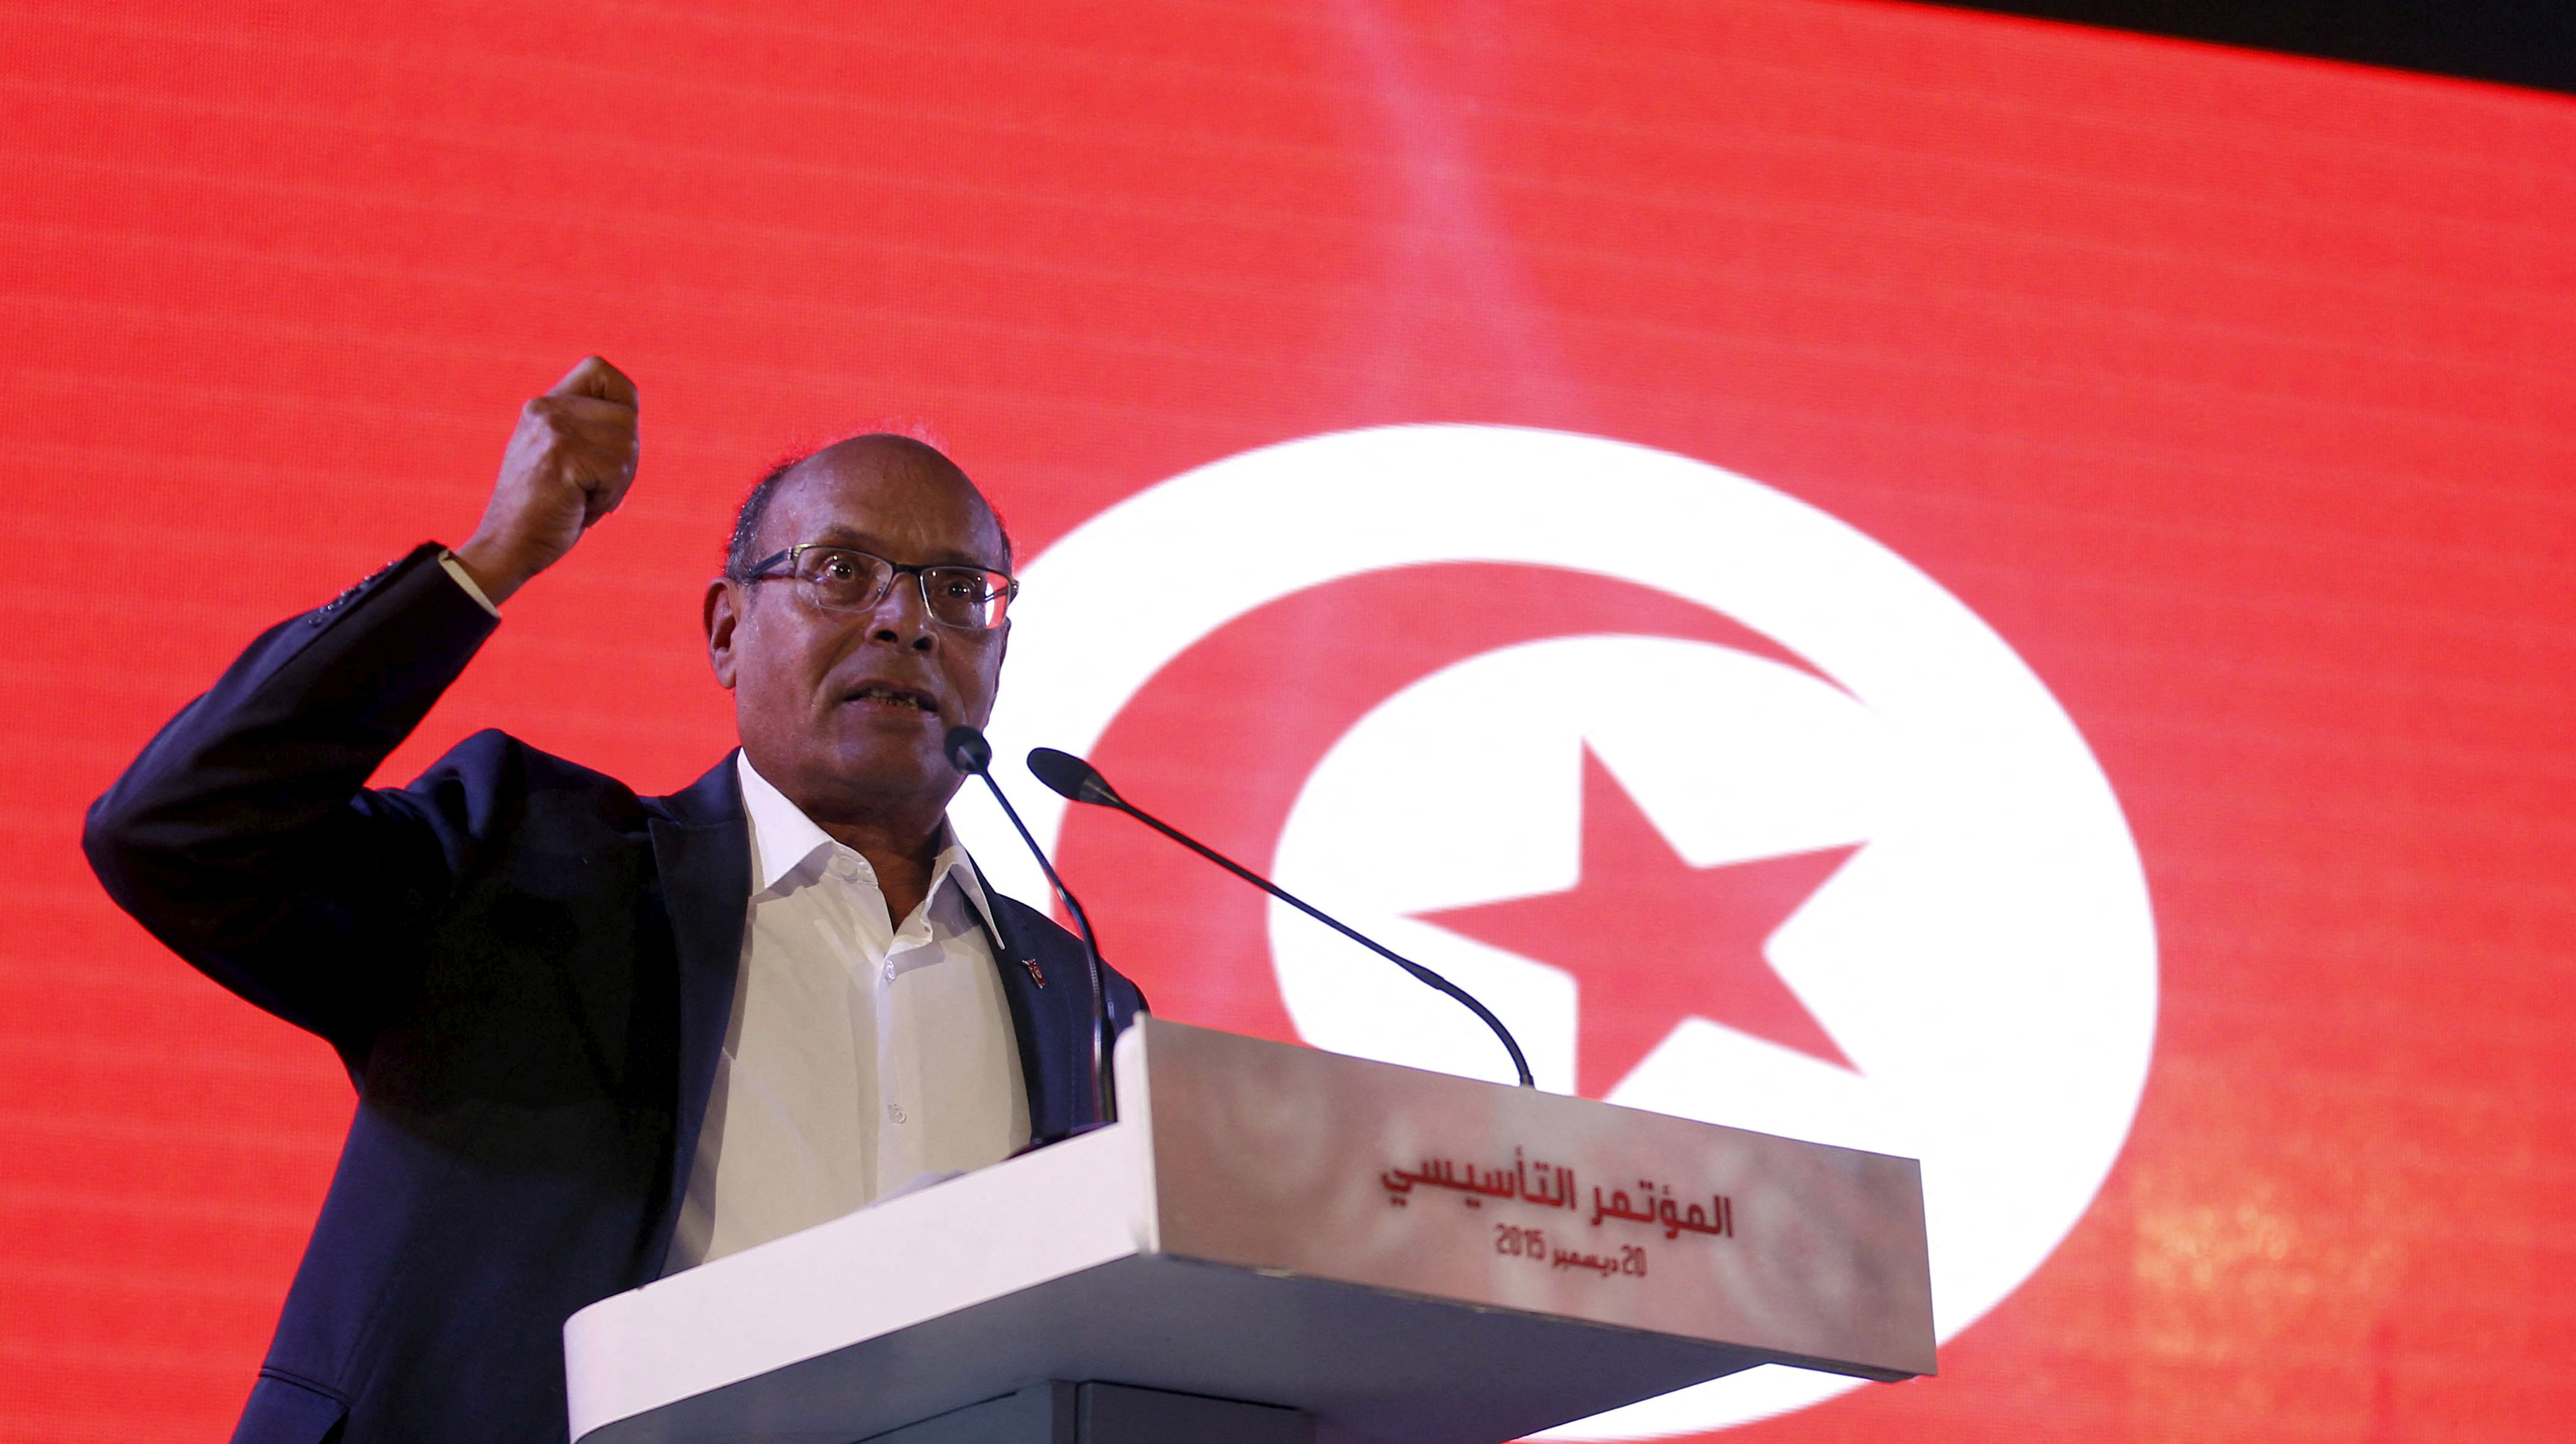 Former Tunisian President Moncef Marzouki speaks at a meeting to launch his new political party in Tunis